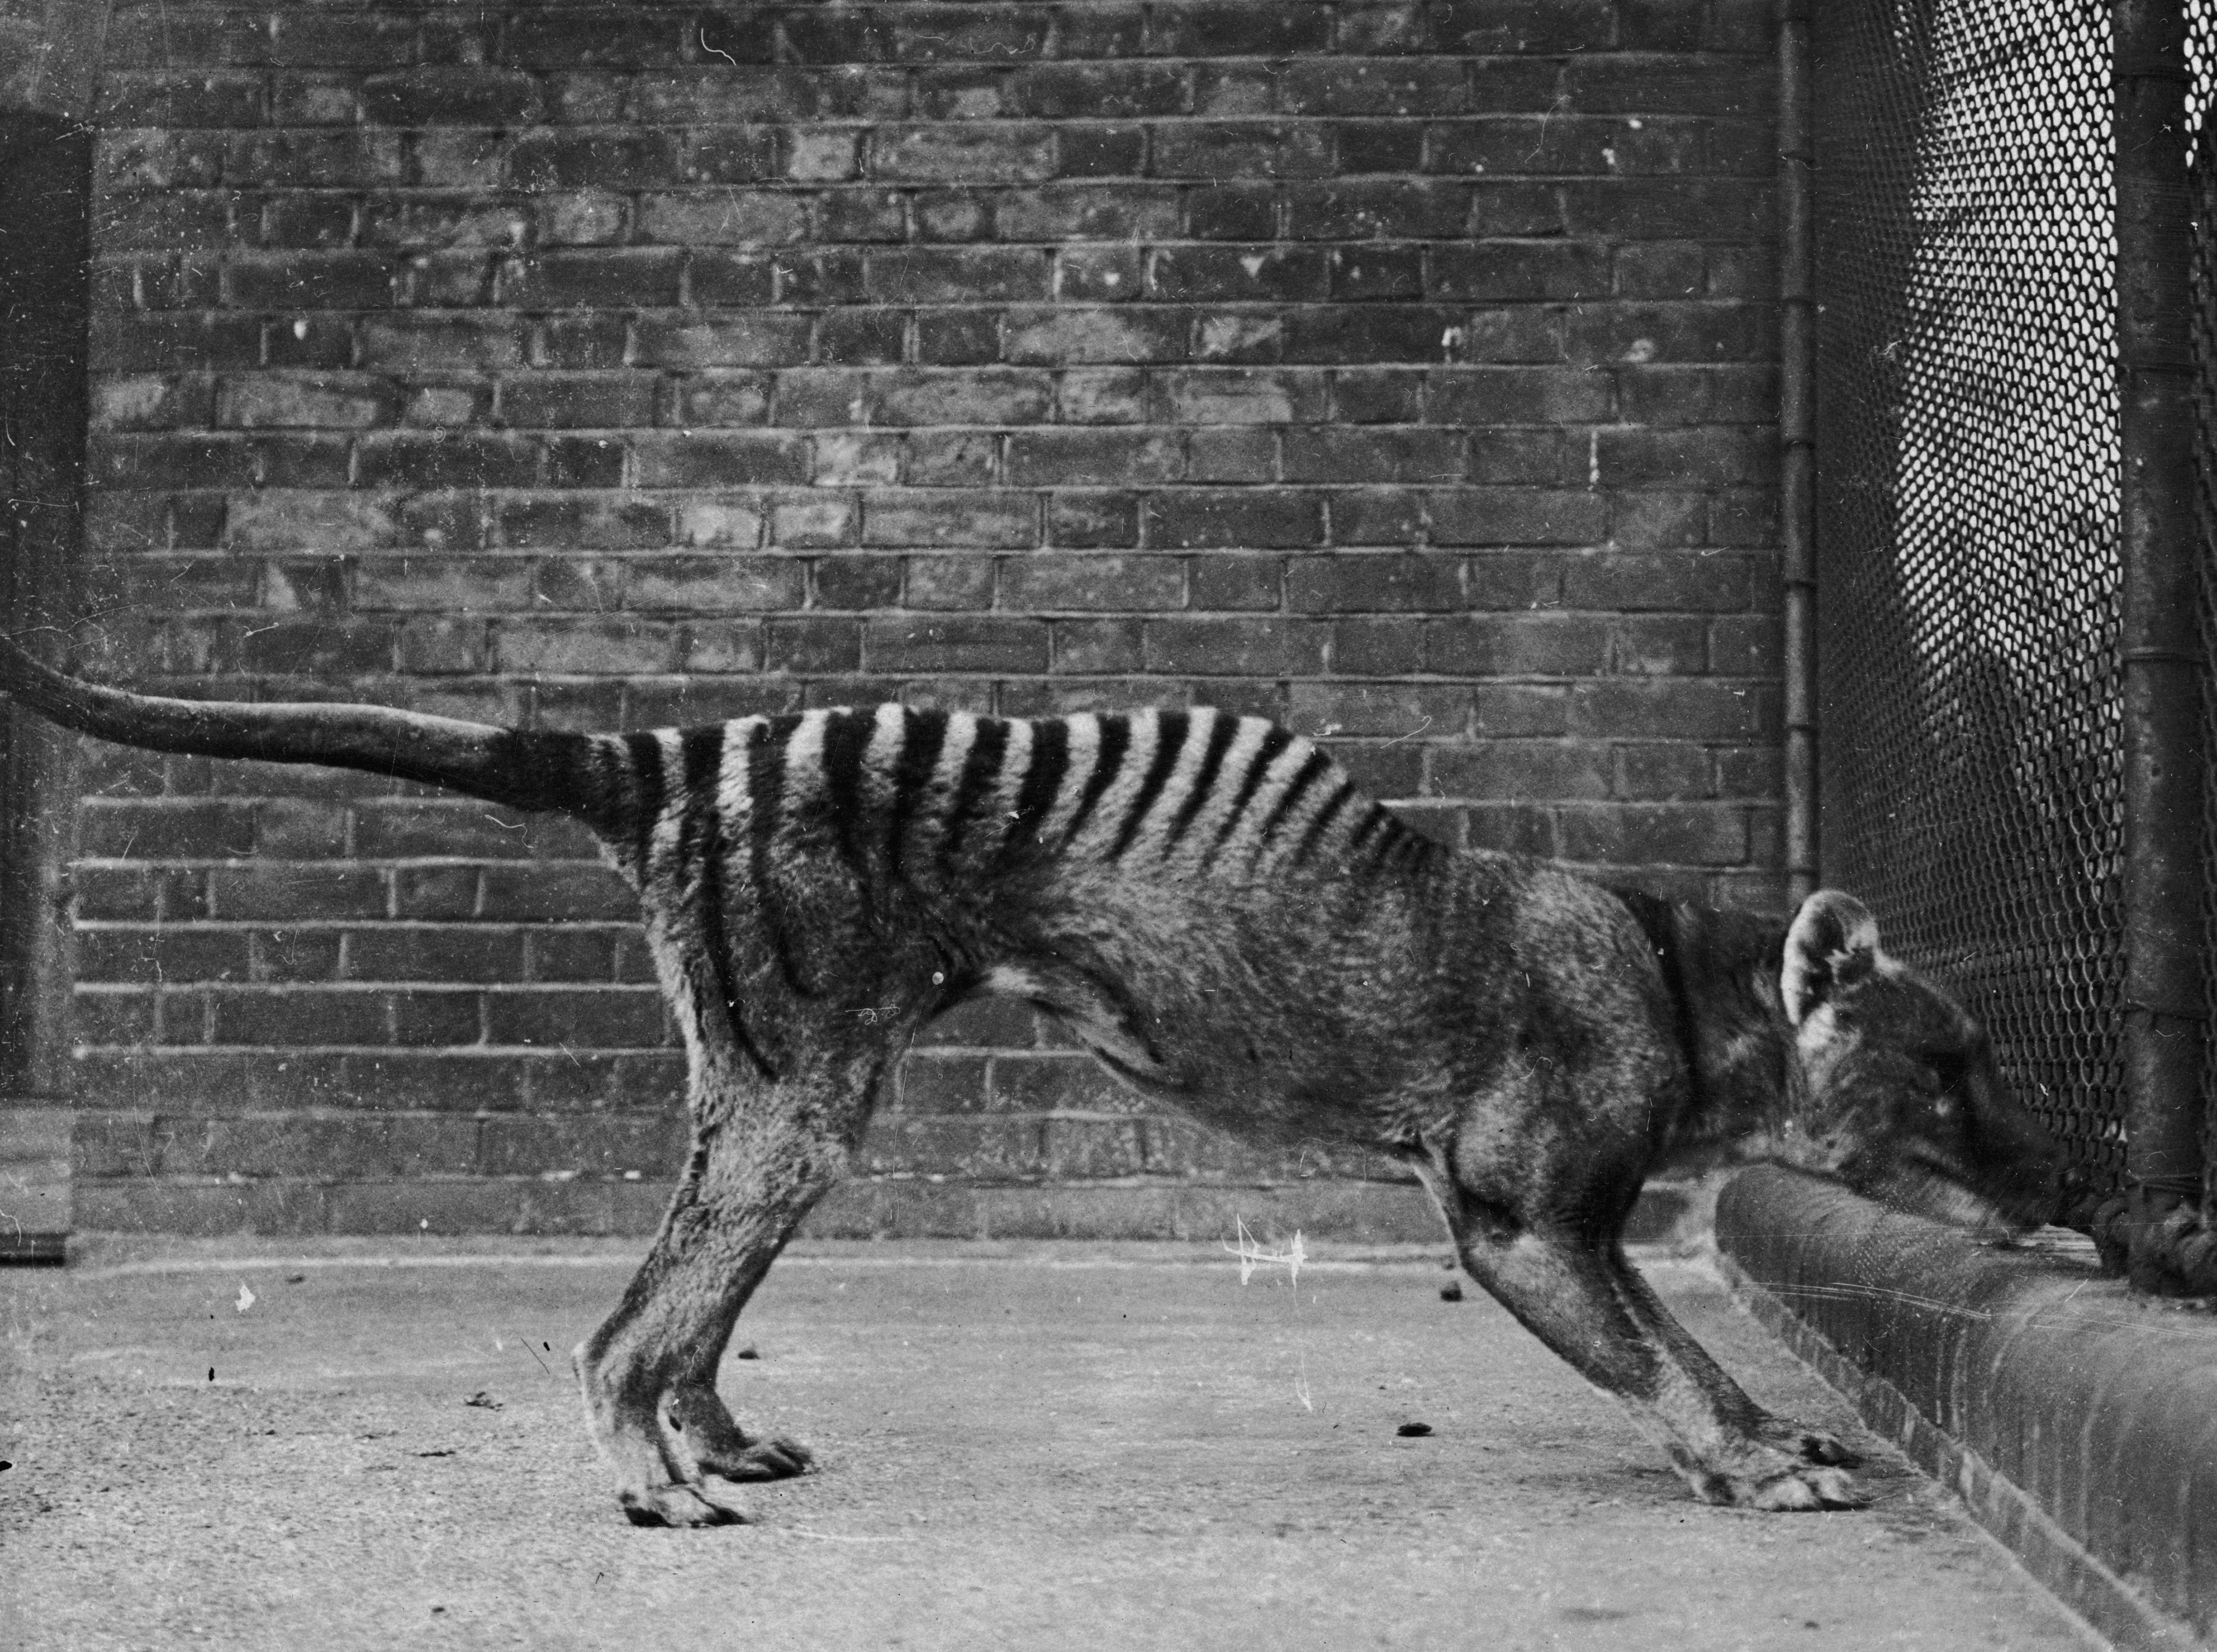 Colossal also has plans to resurrect the thylacine, also known as the Tasmanian tiger, an extinct carnivore seen here in captivity around 1930